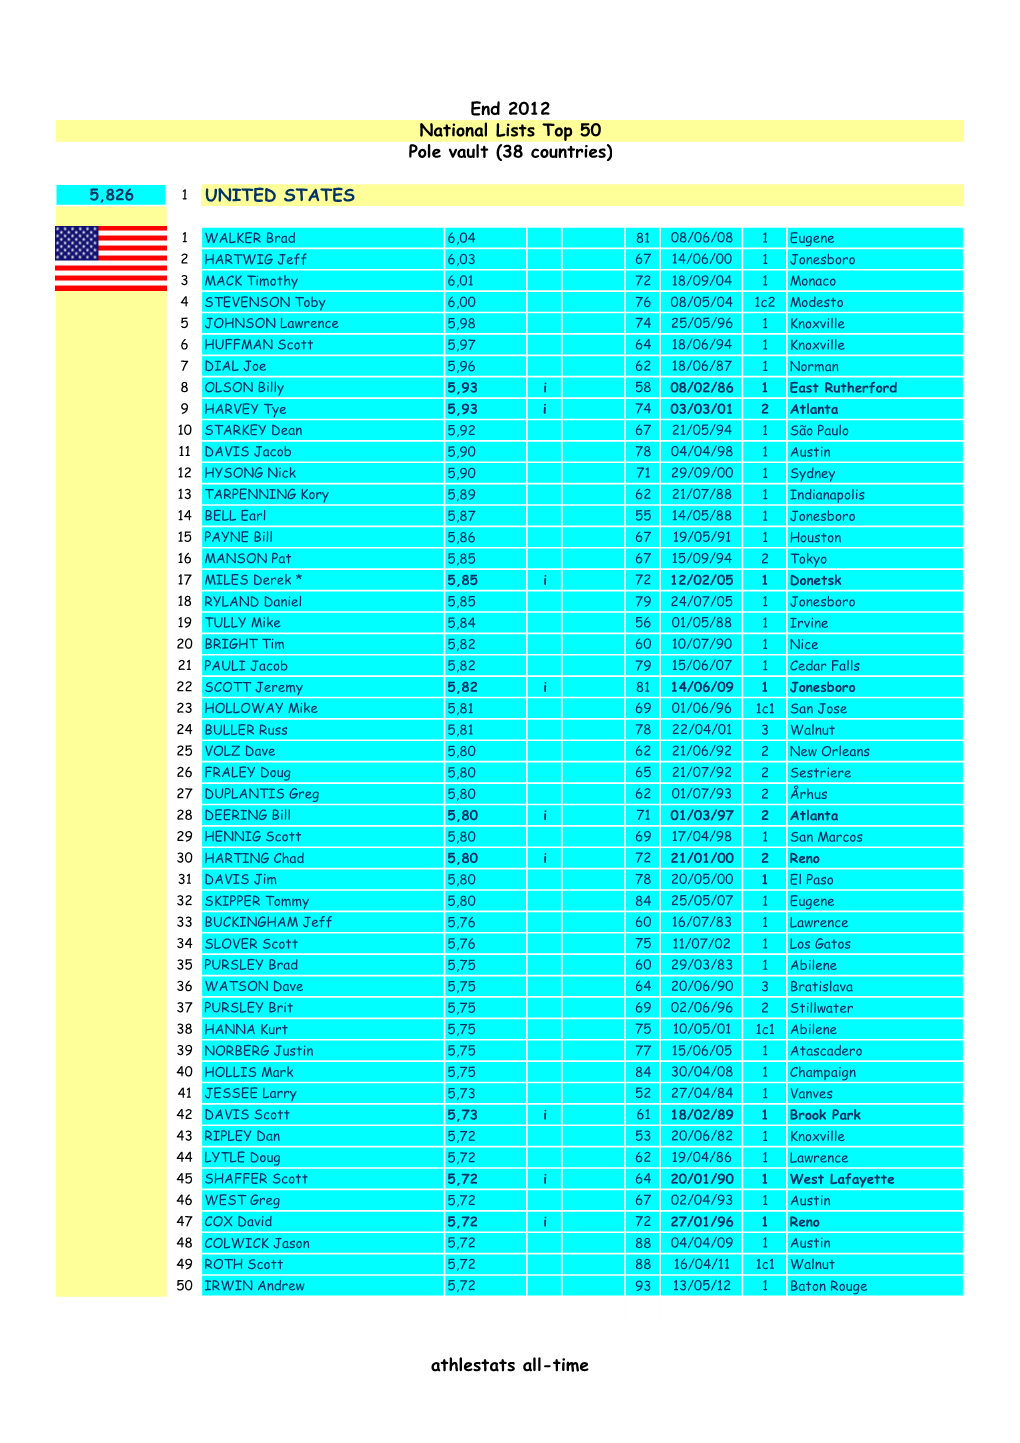 End 2012 National Lists Top 50 Pole Vault (38 Countries)